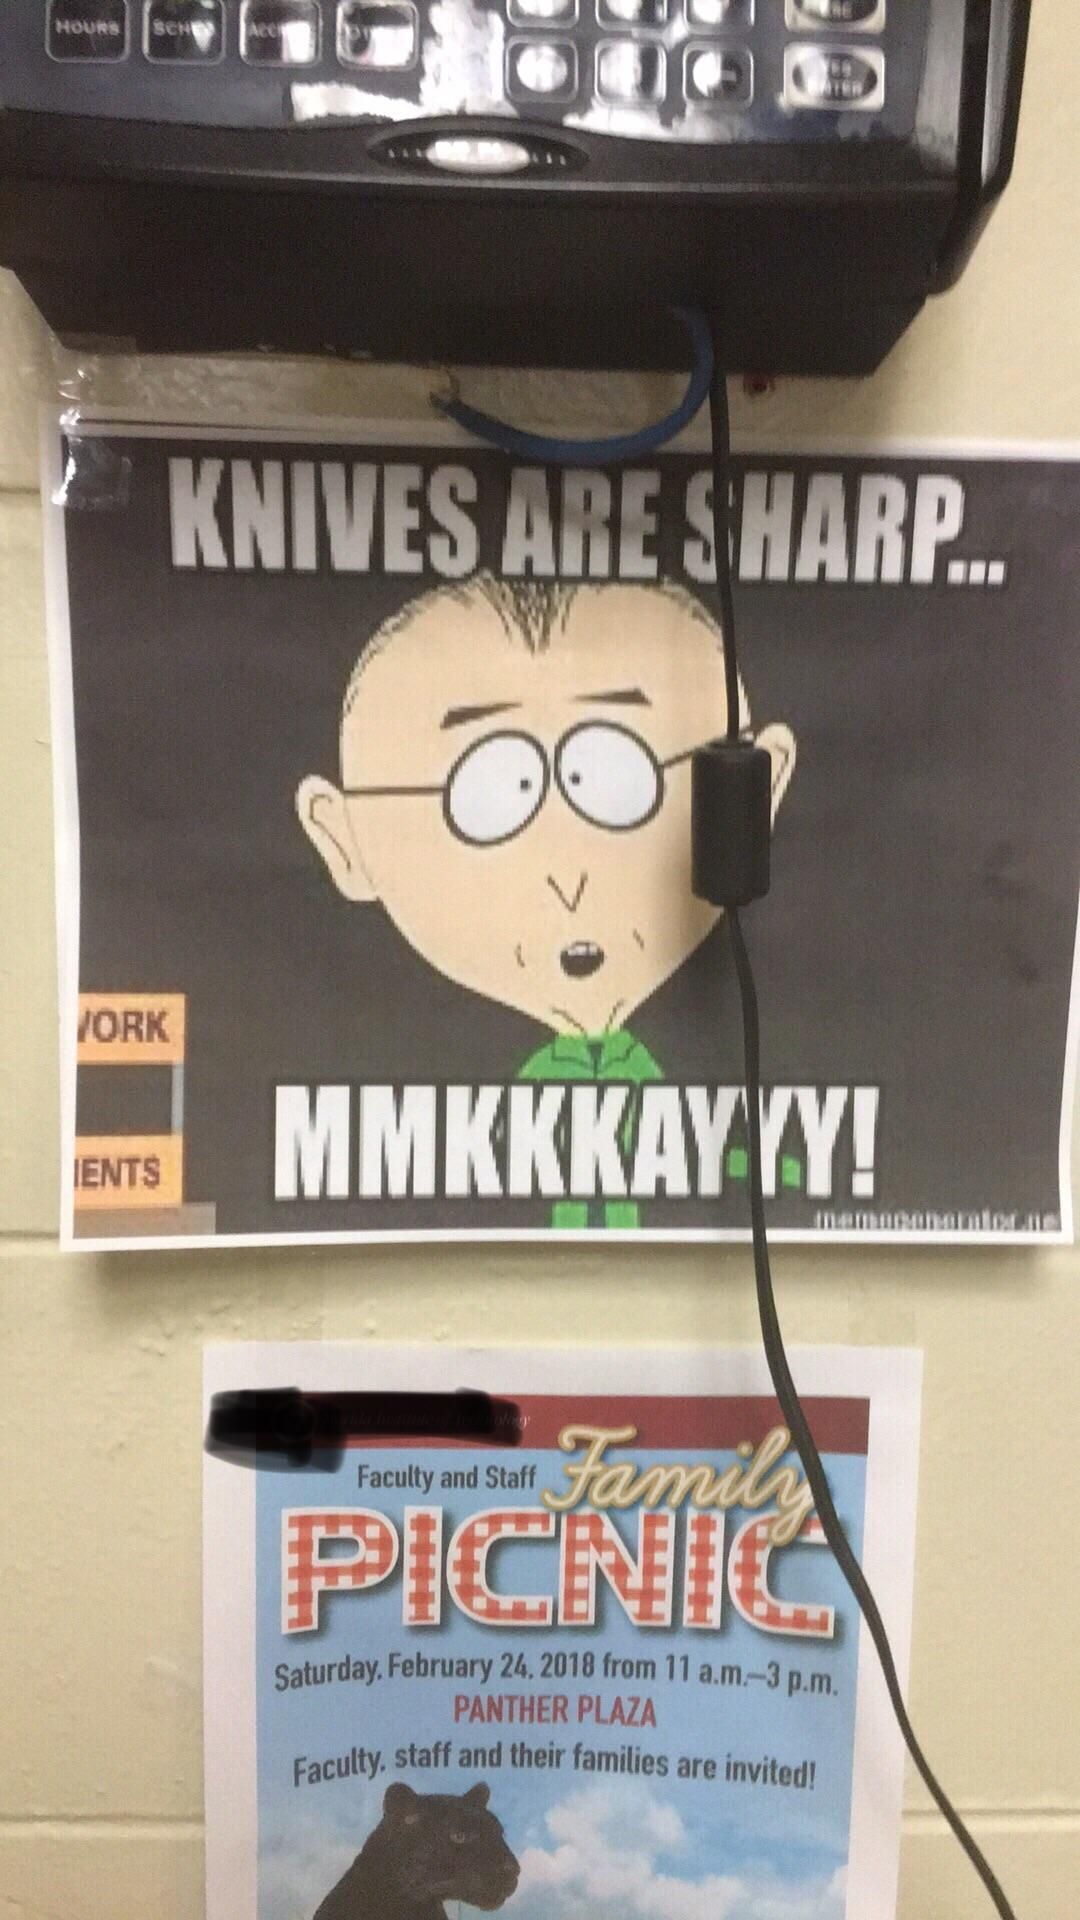 I told my boss we need to put a sign up so the kitchen staff knows we sharpened the knives and this is what he chose to tell everyone.